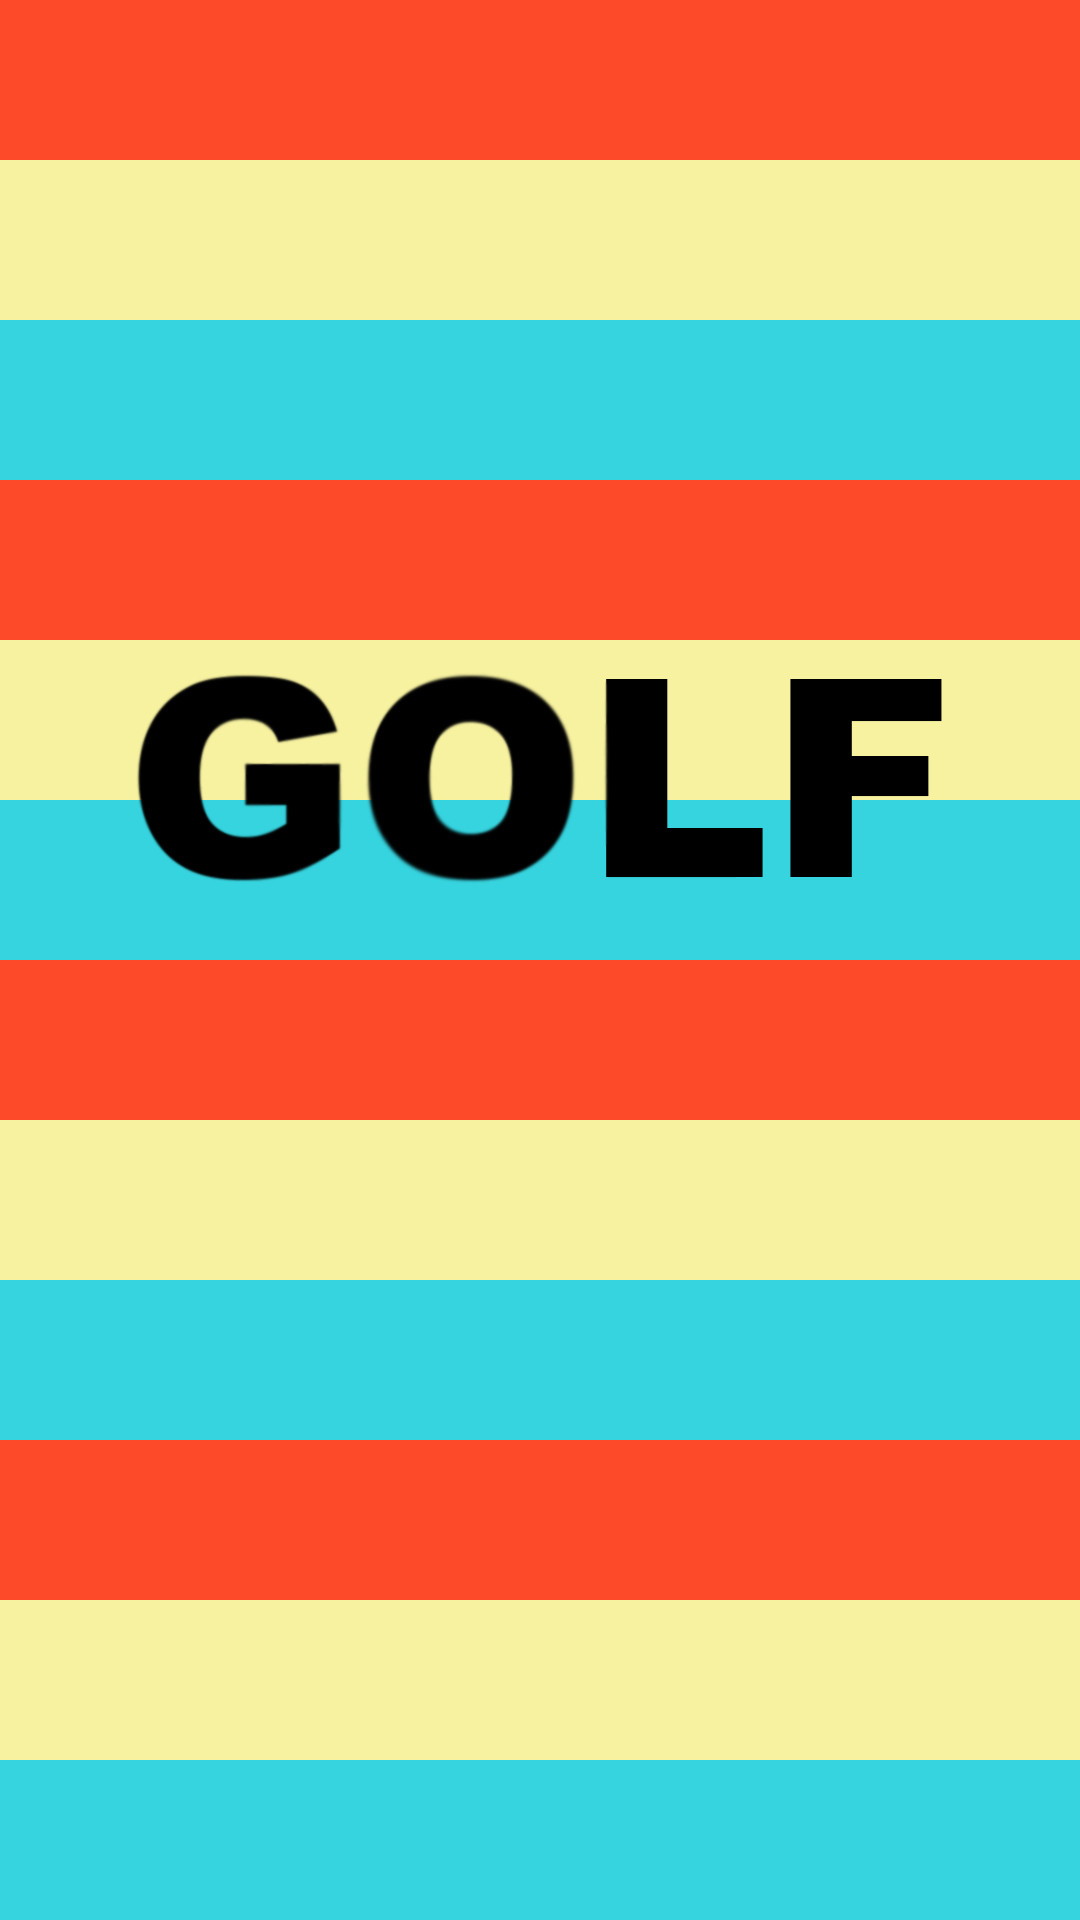 1080x1920 GOLF Striped Mobile Wallpaper () Need #iPhone #6S #Plus #Wallpaper